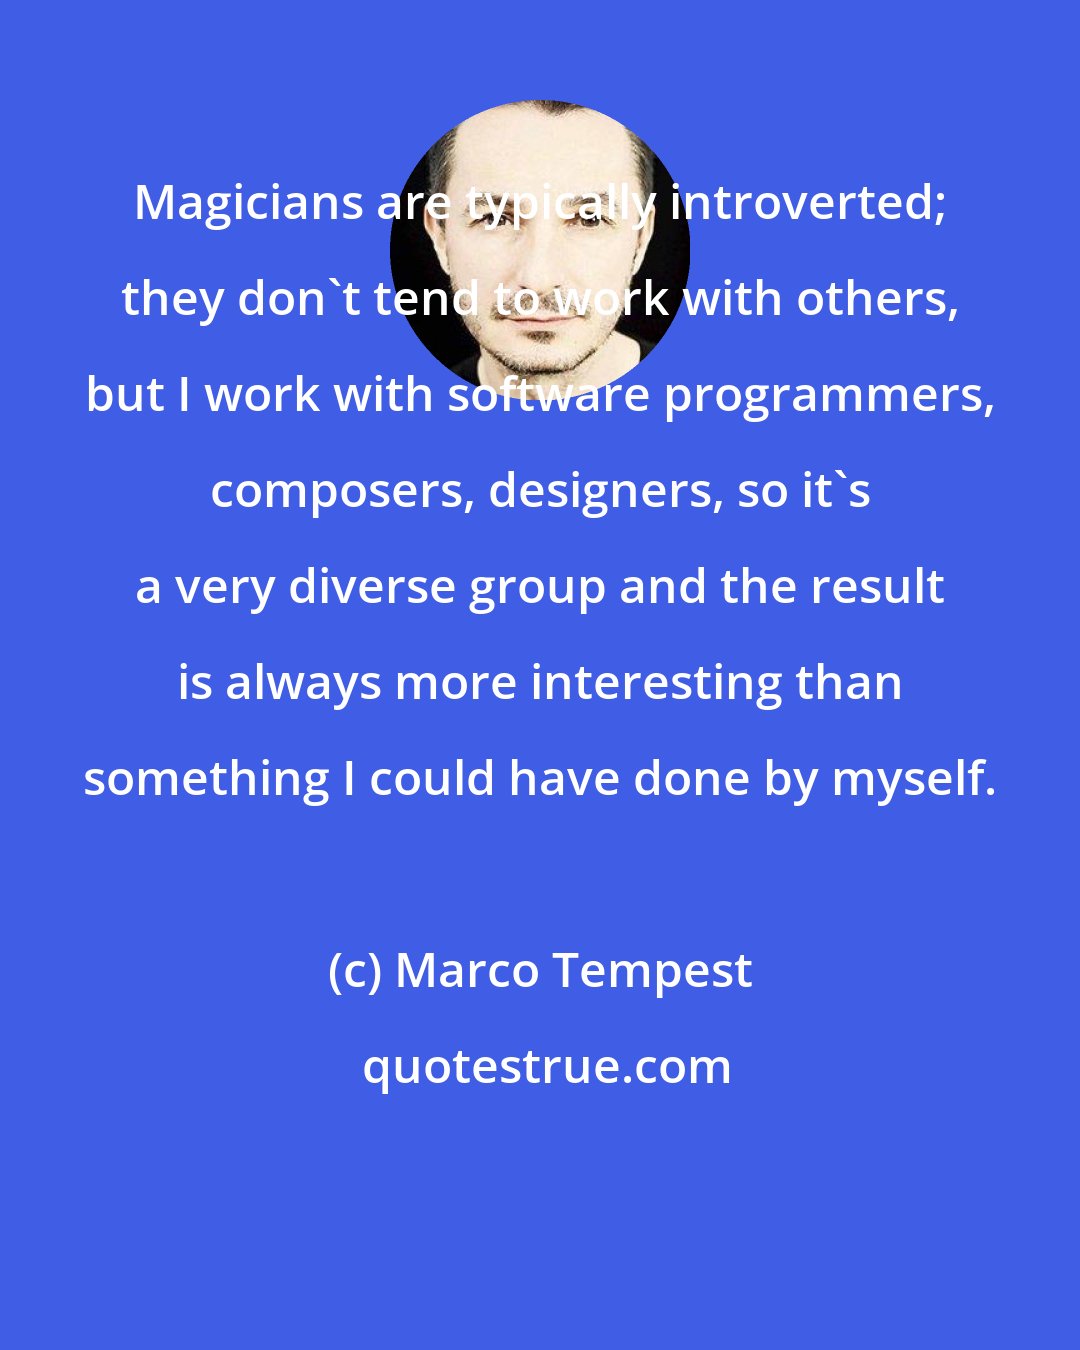 Marco Tempest: Magicians are typically introverted; they don't tend to work with others, but I work with software programmers, composers, designers, so it's a very diverse group and the result is always more interesting than something I could have done by myself.